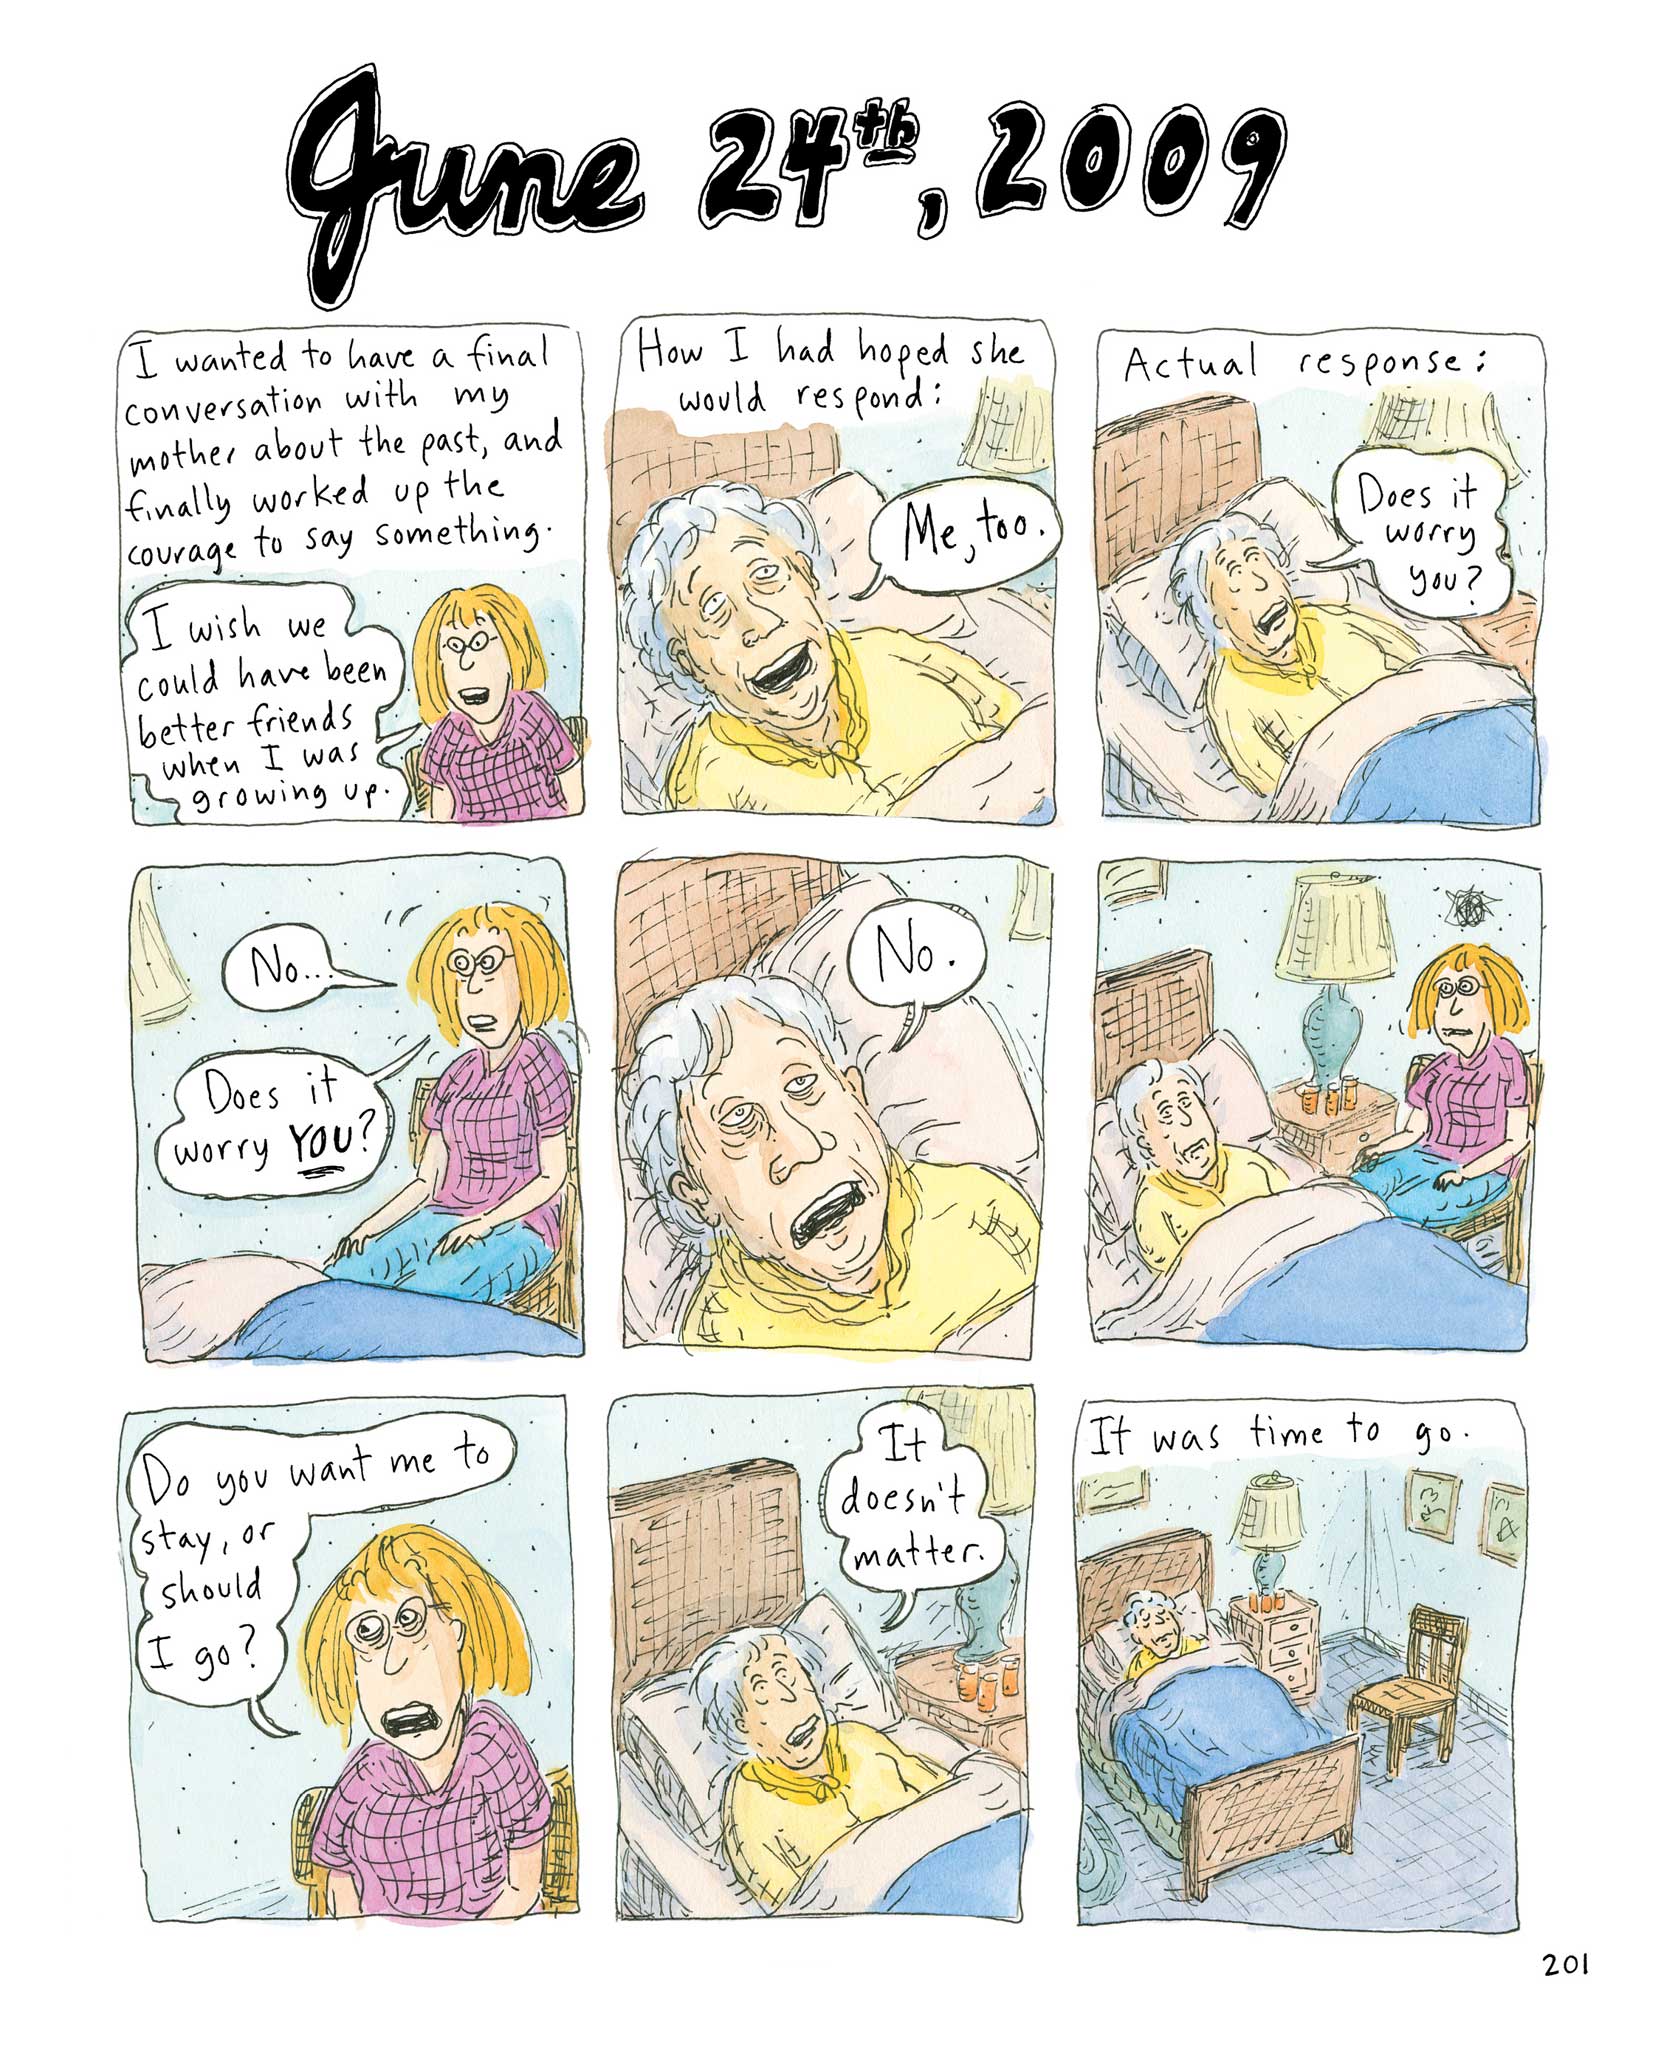 Straight talking: Roz Chast's work tackles a dark, tricky subject